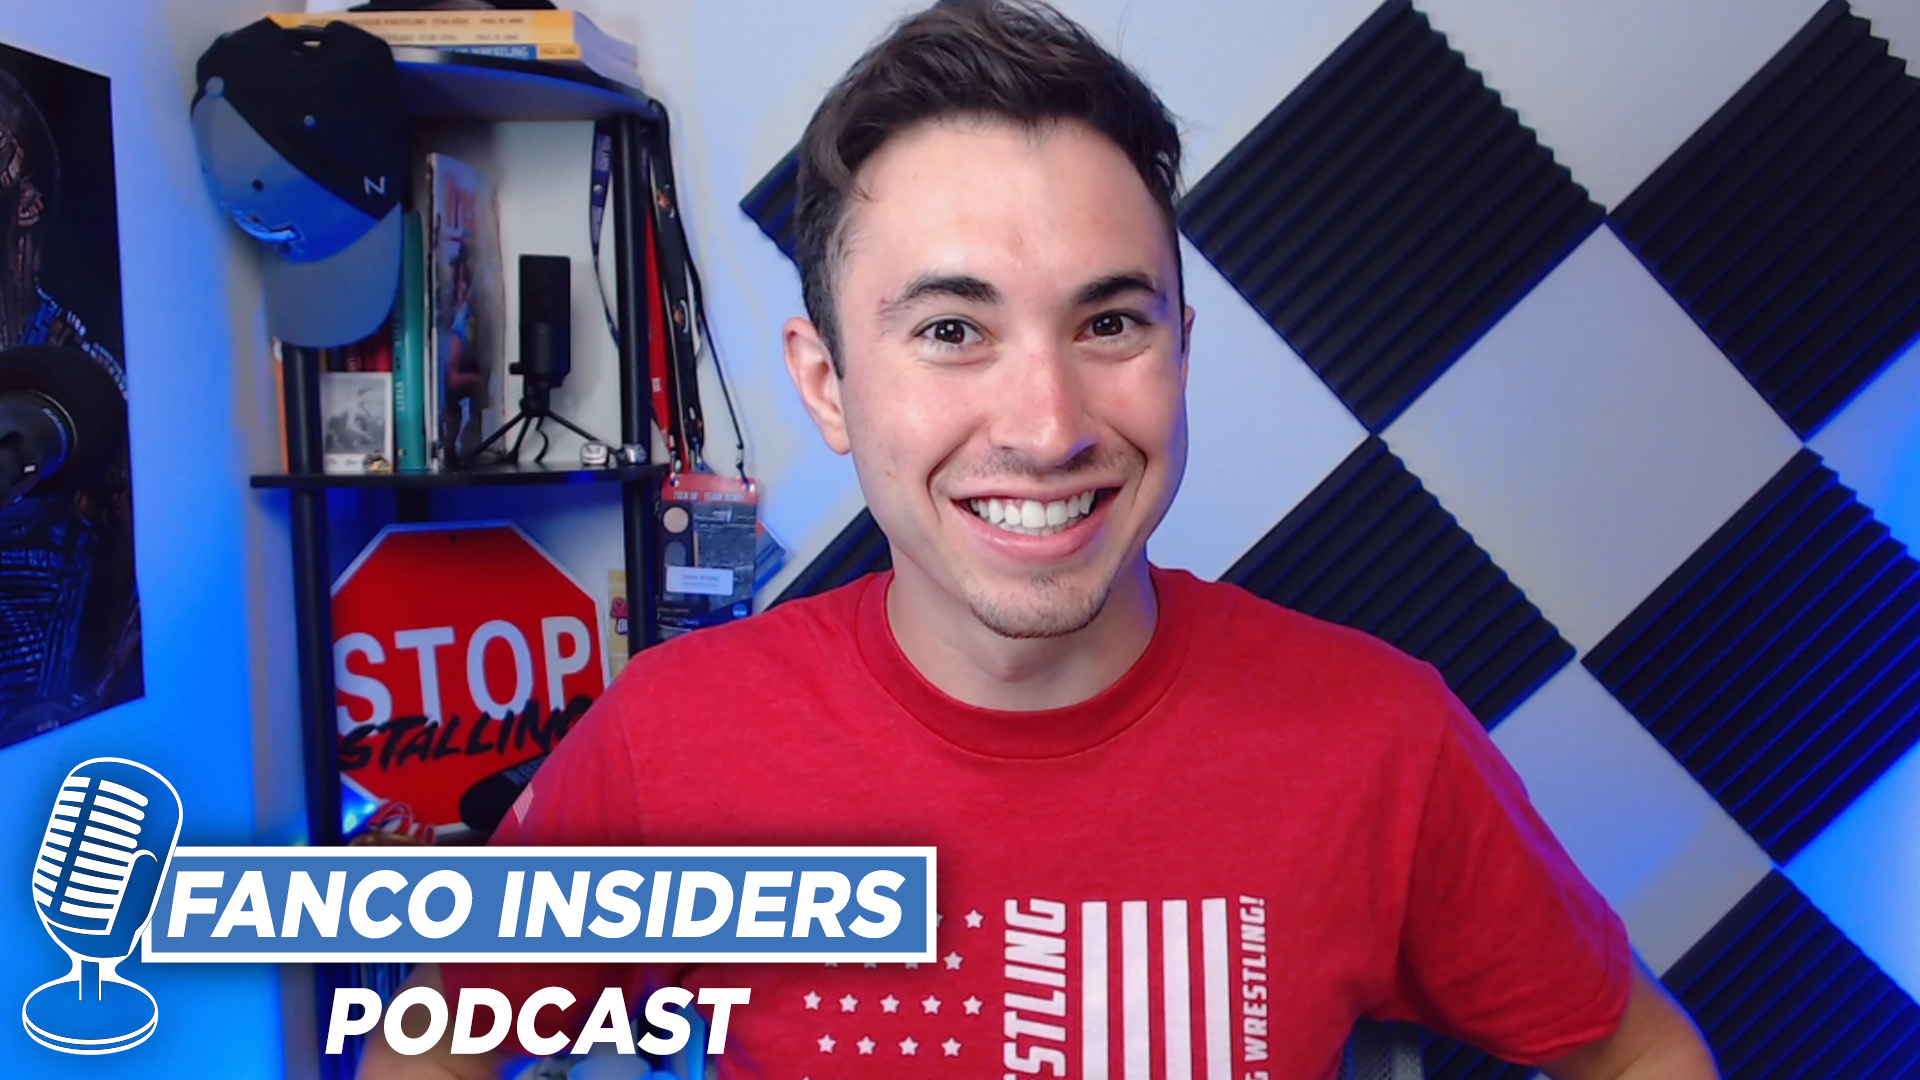 You are currently viewing Fanco Insiders Podcast #1